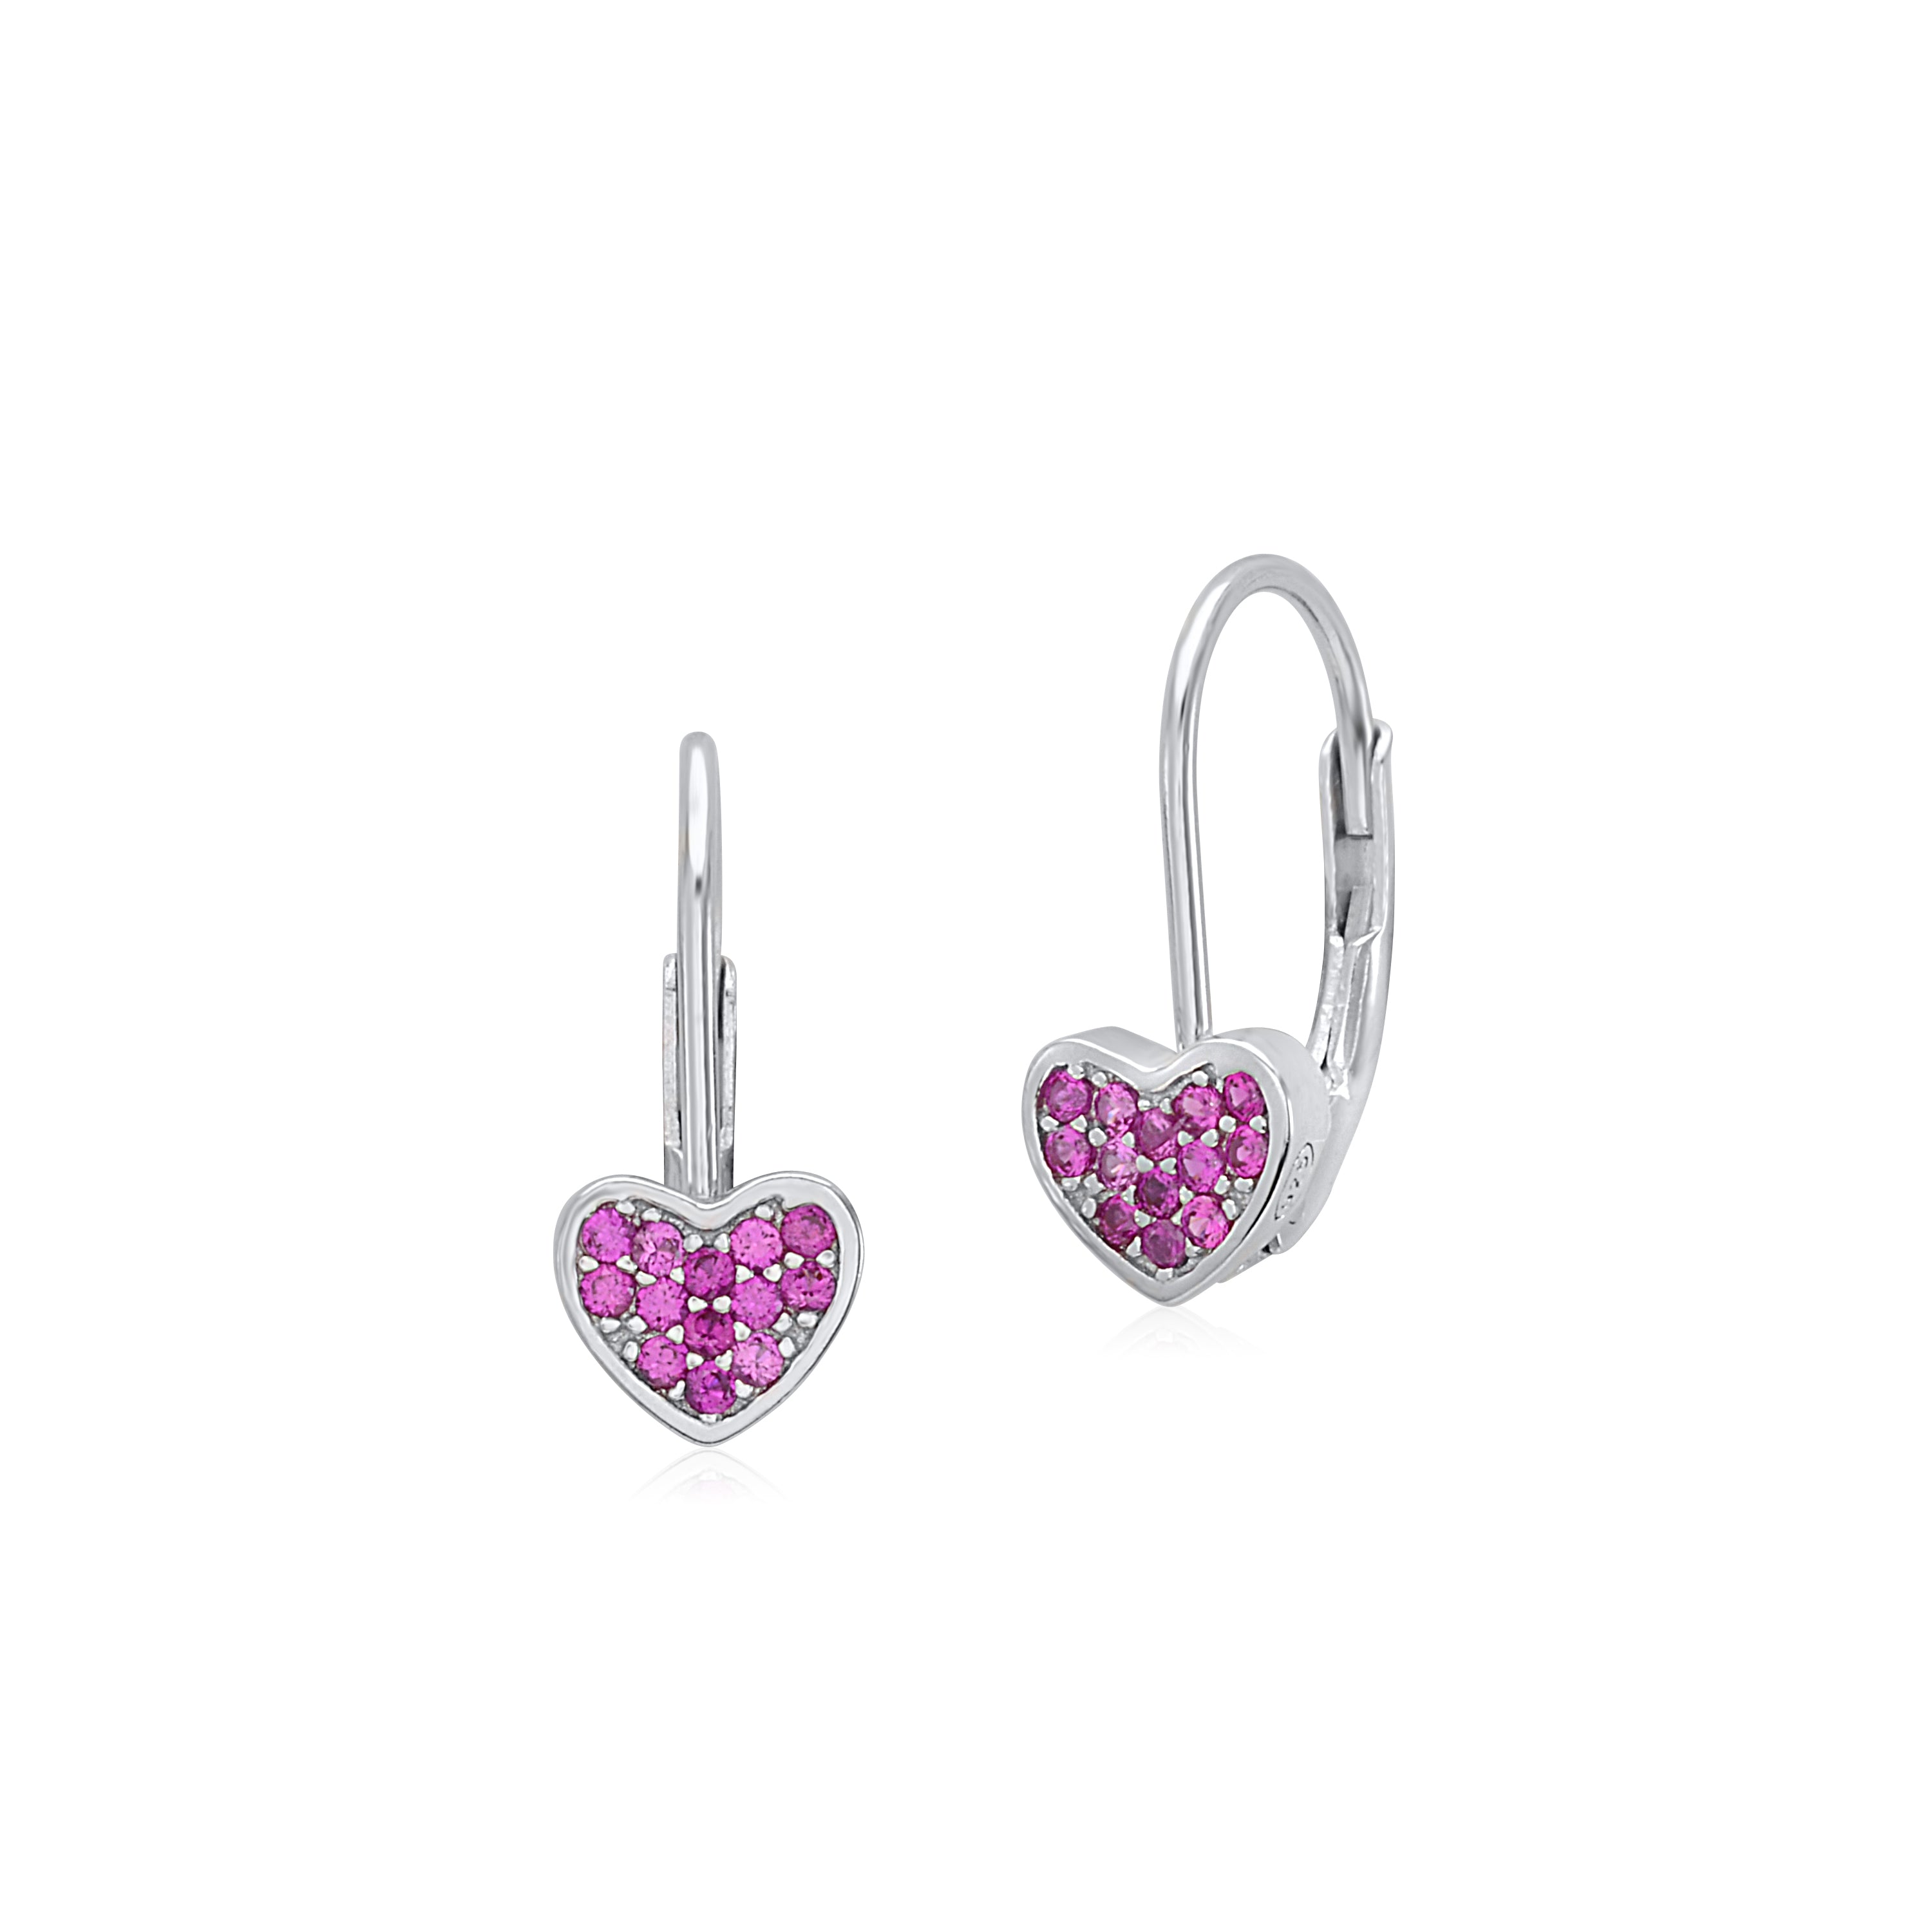 UNICORNJ Sterling Silver 925 or Dark Pink Kids Small Fixed Heart Leverback Earrings with Pave CZ Italy